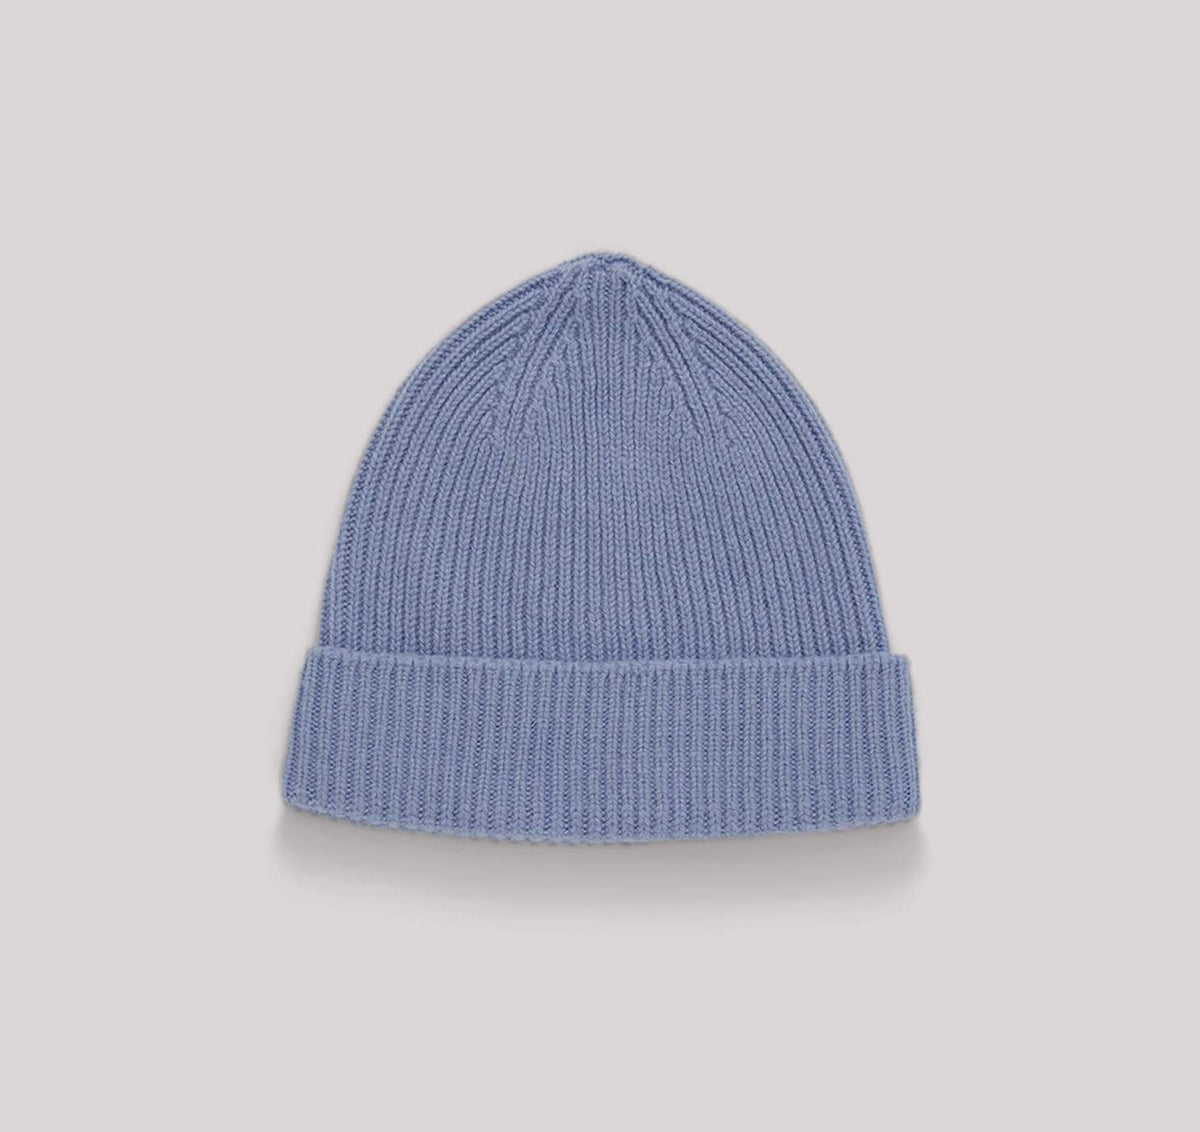 An Organic Basics Recycled Wool Beanie– Light Blue on a grey background.